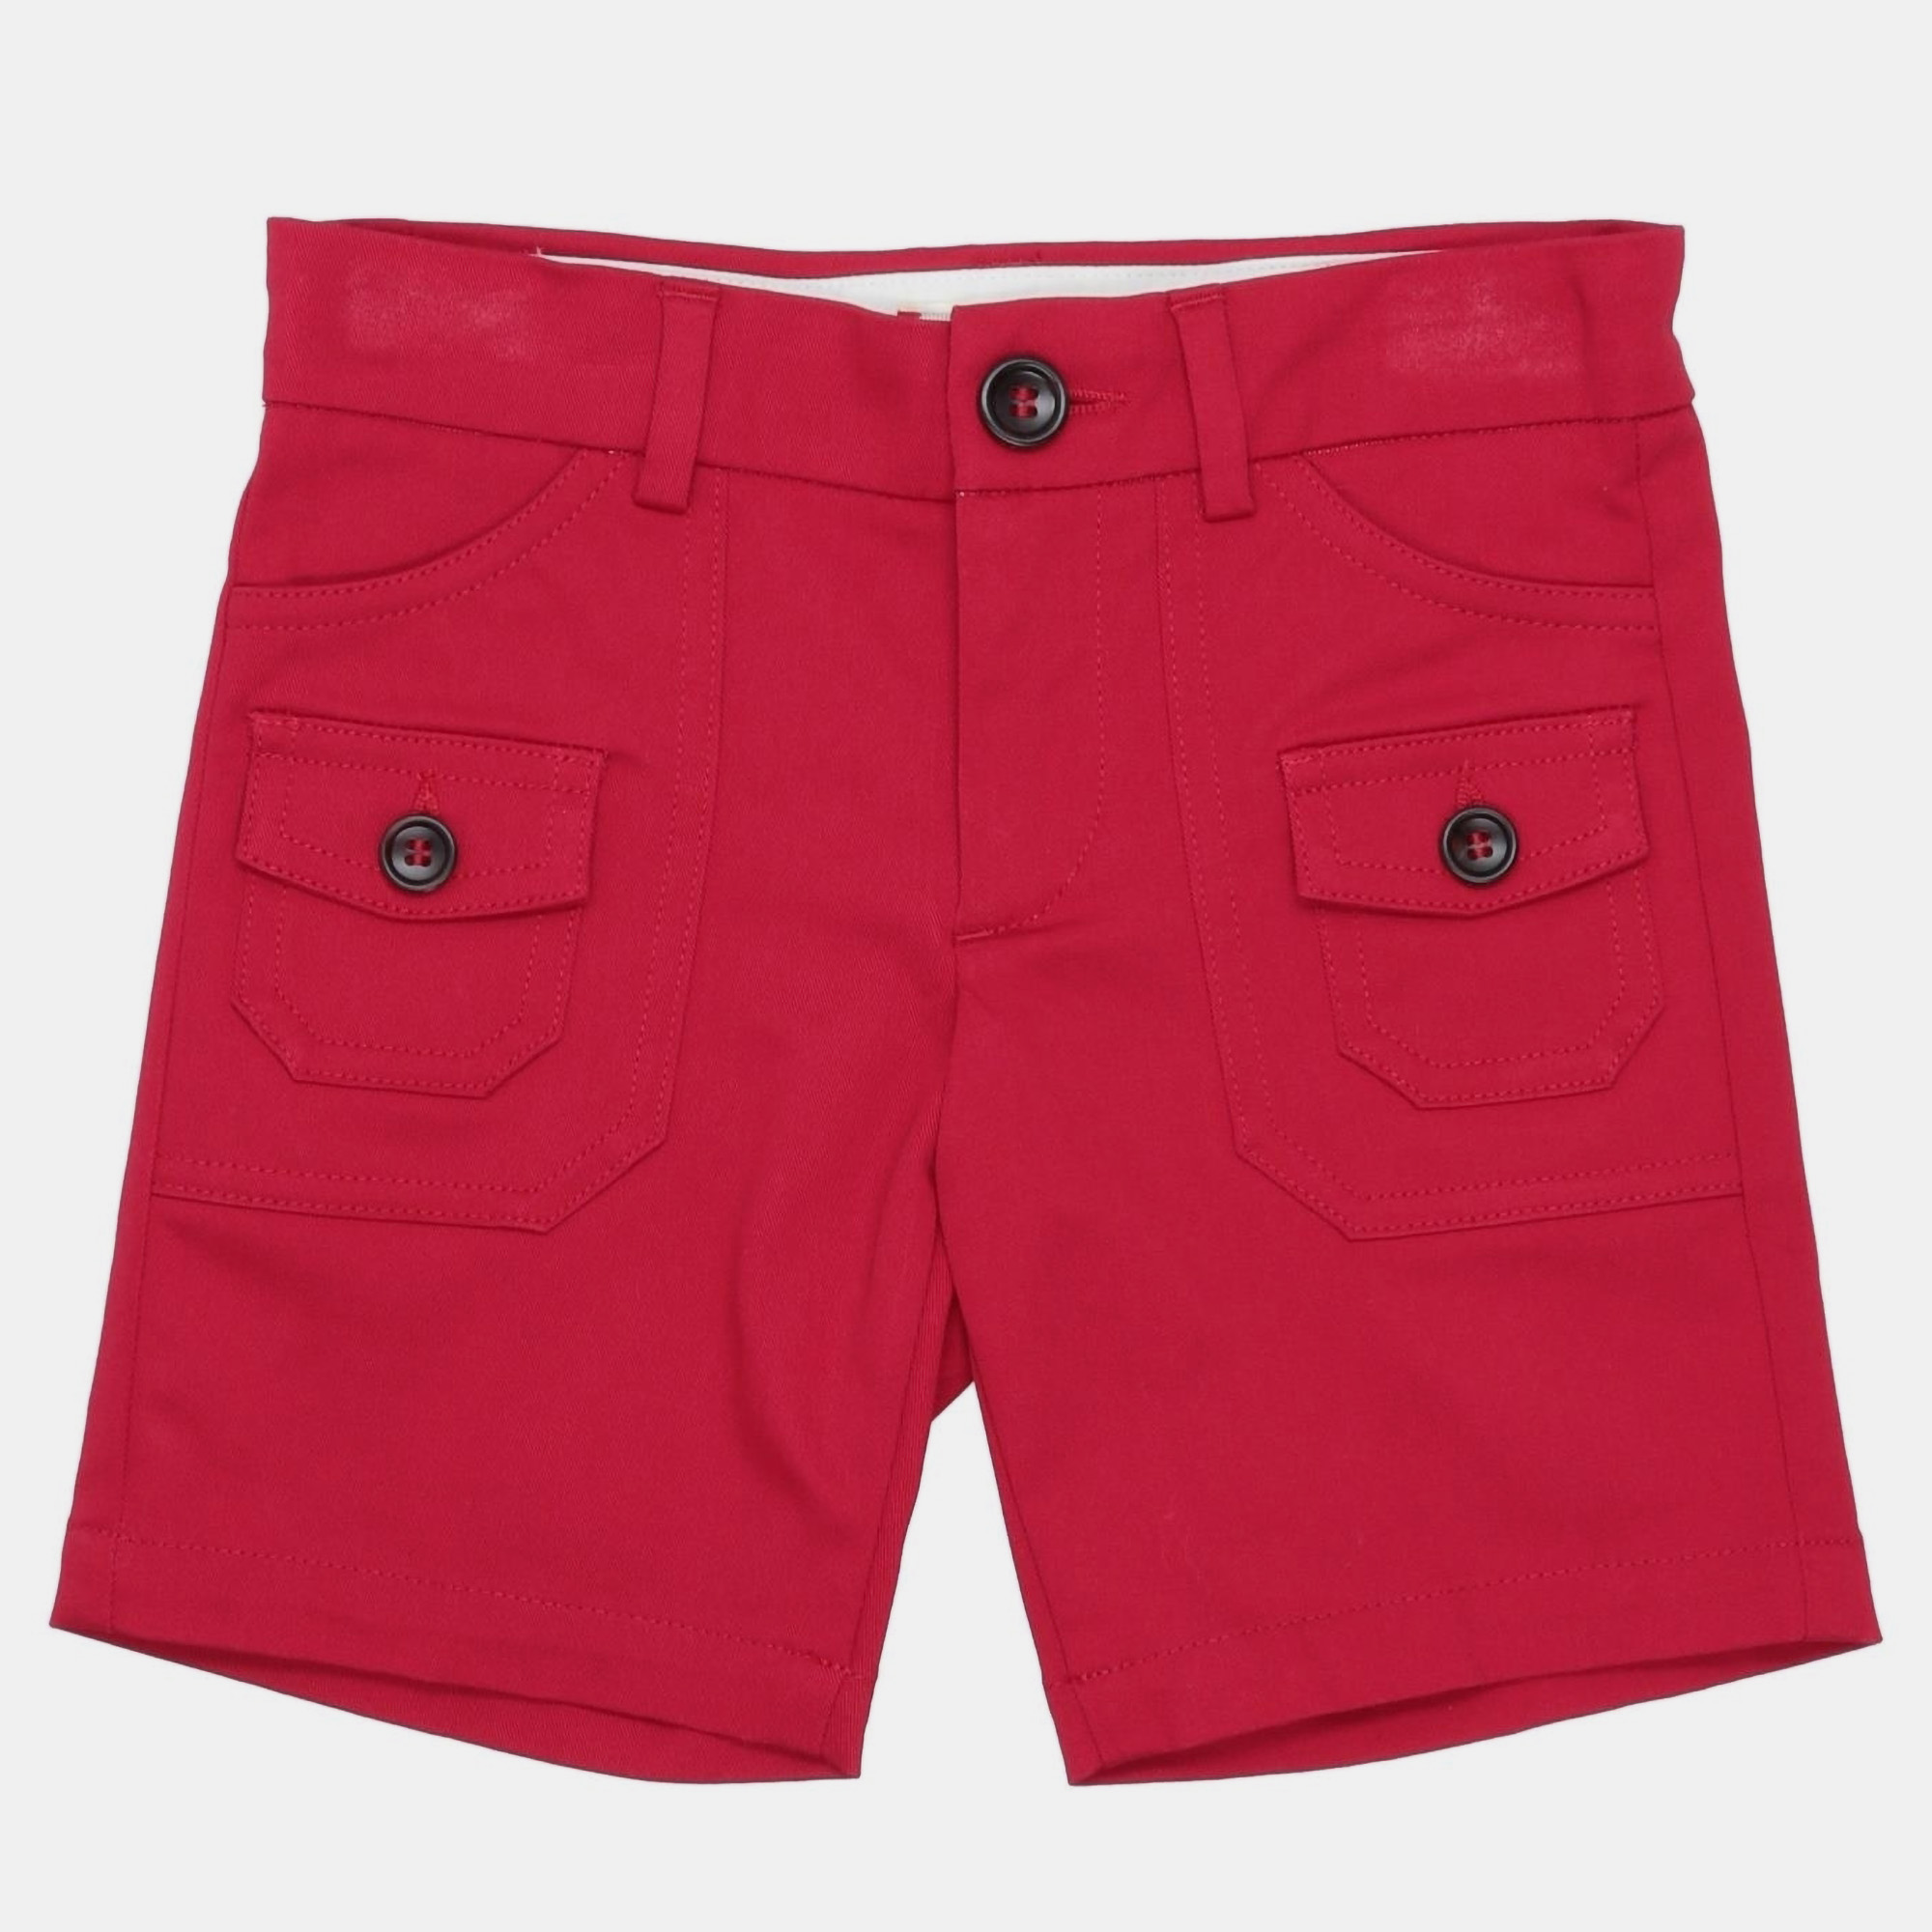 Elevate your childs style with these designer trousers meticulously crafted for both comfort and flair. Made from premium materials these trousers offer a luxurious feel while ensuring durability for every adventure.